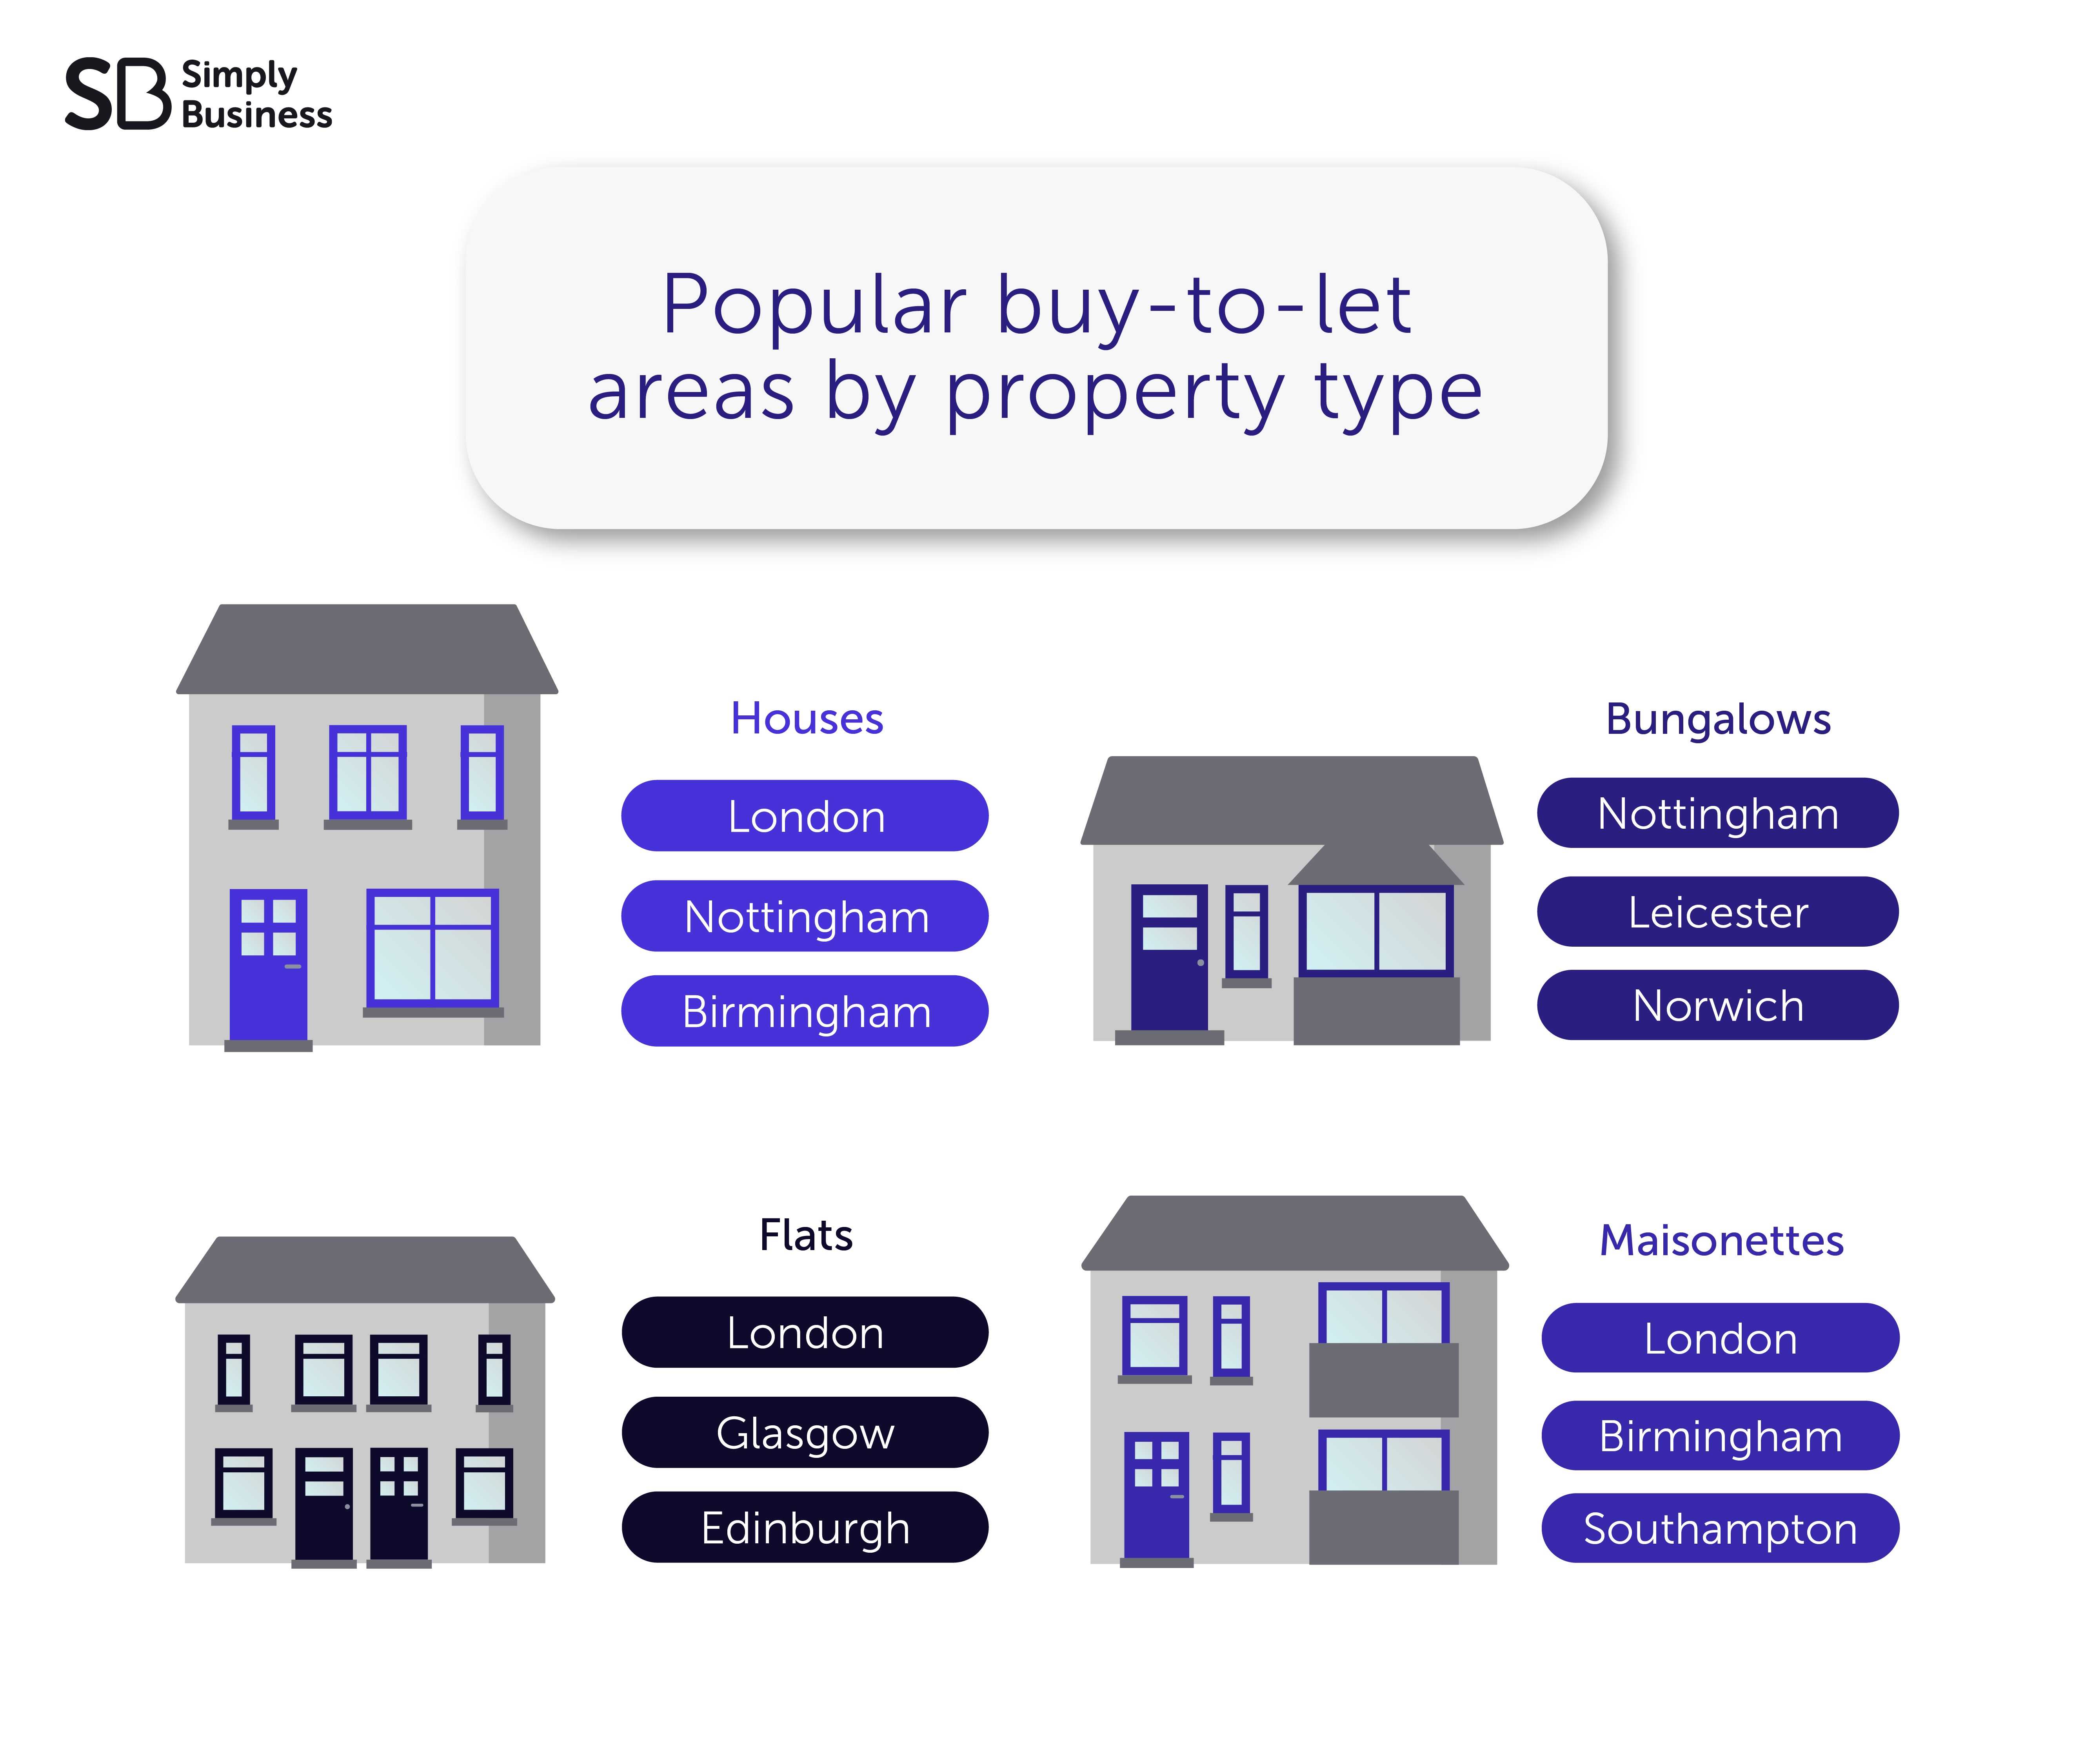 Popular buy-to-let areas by property type